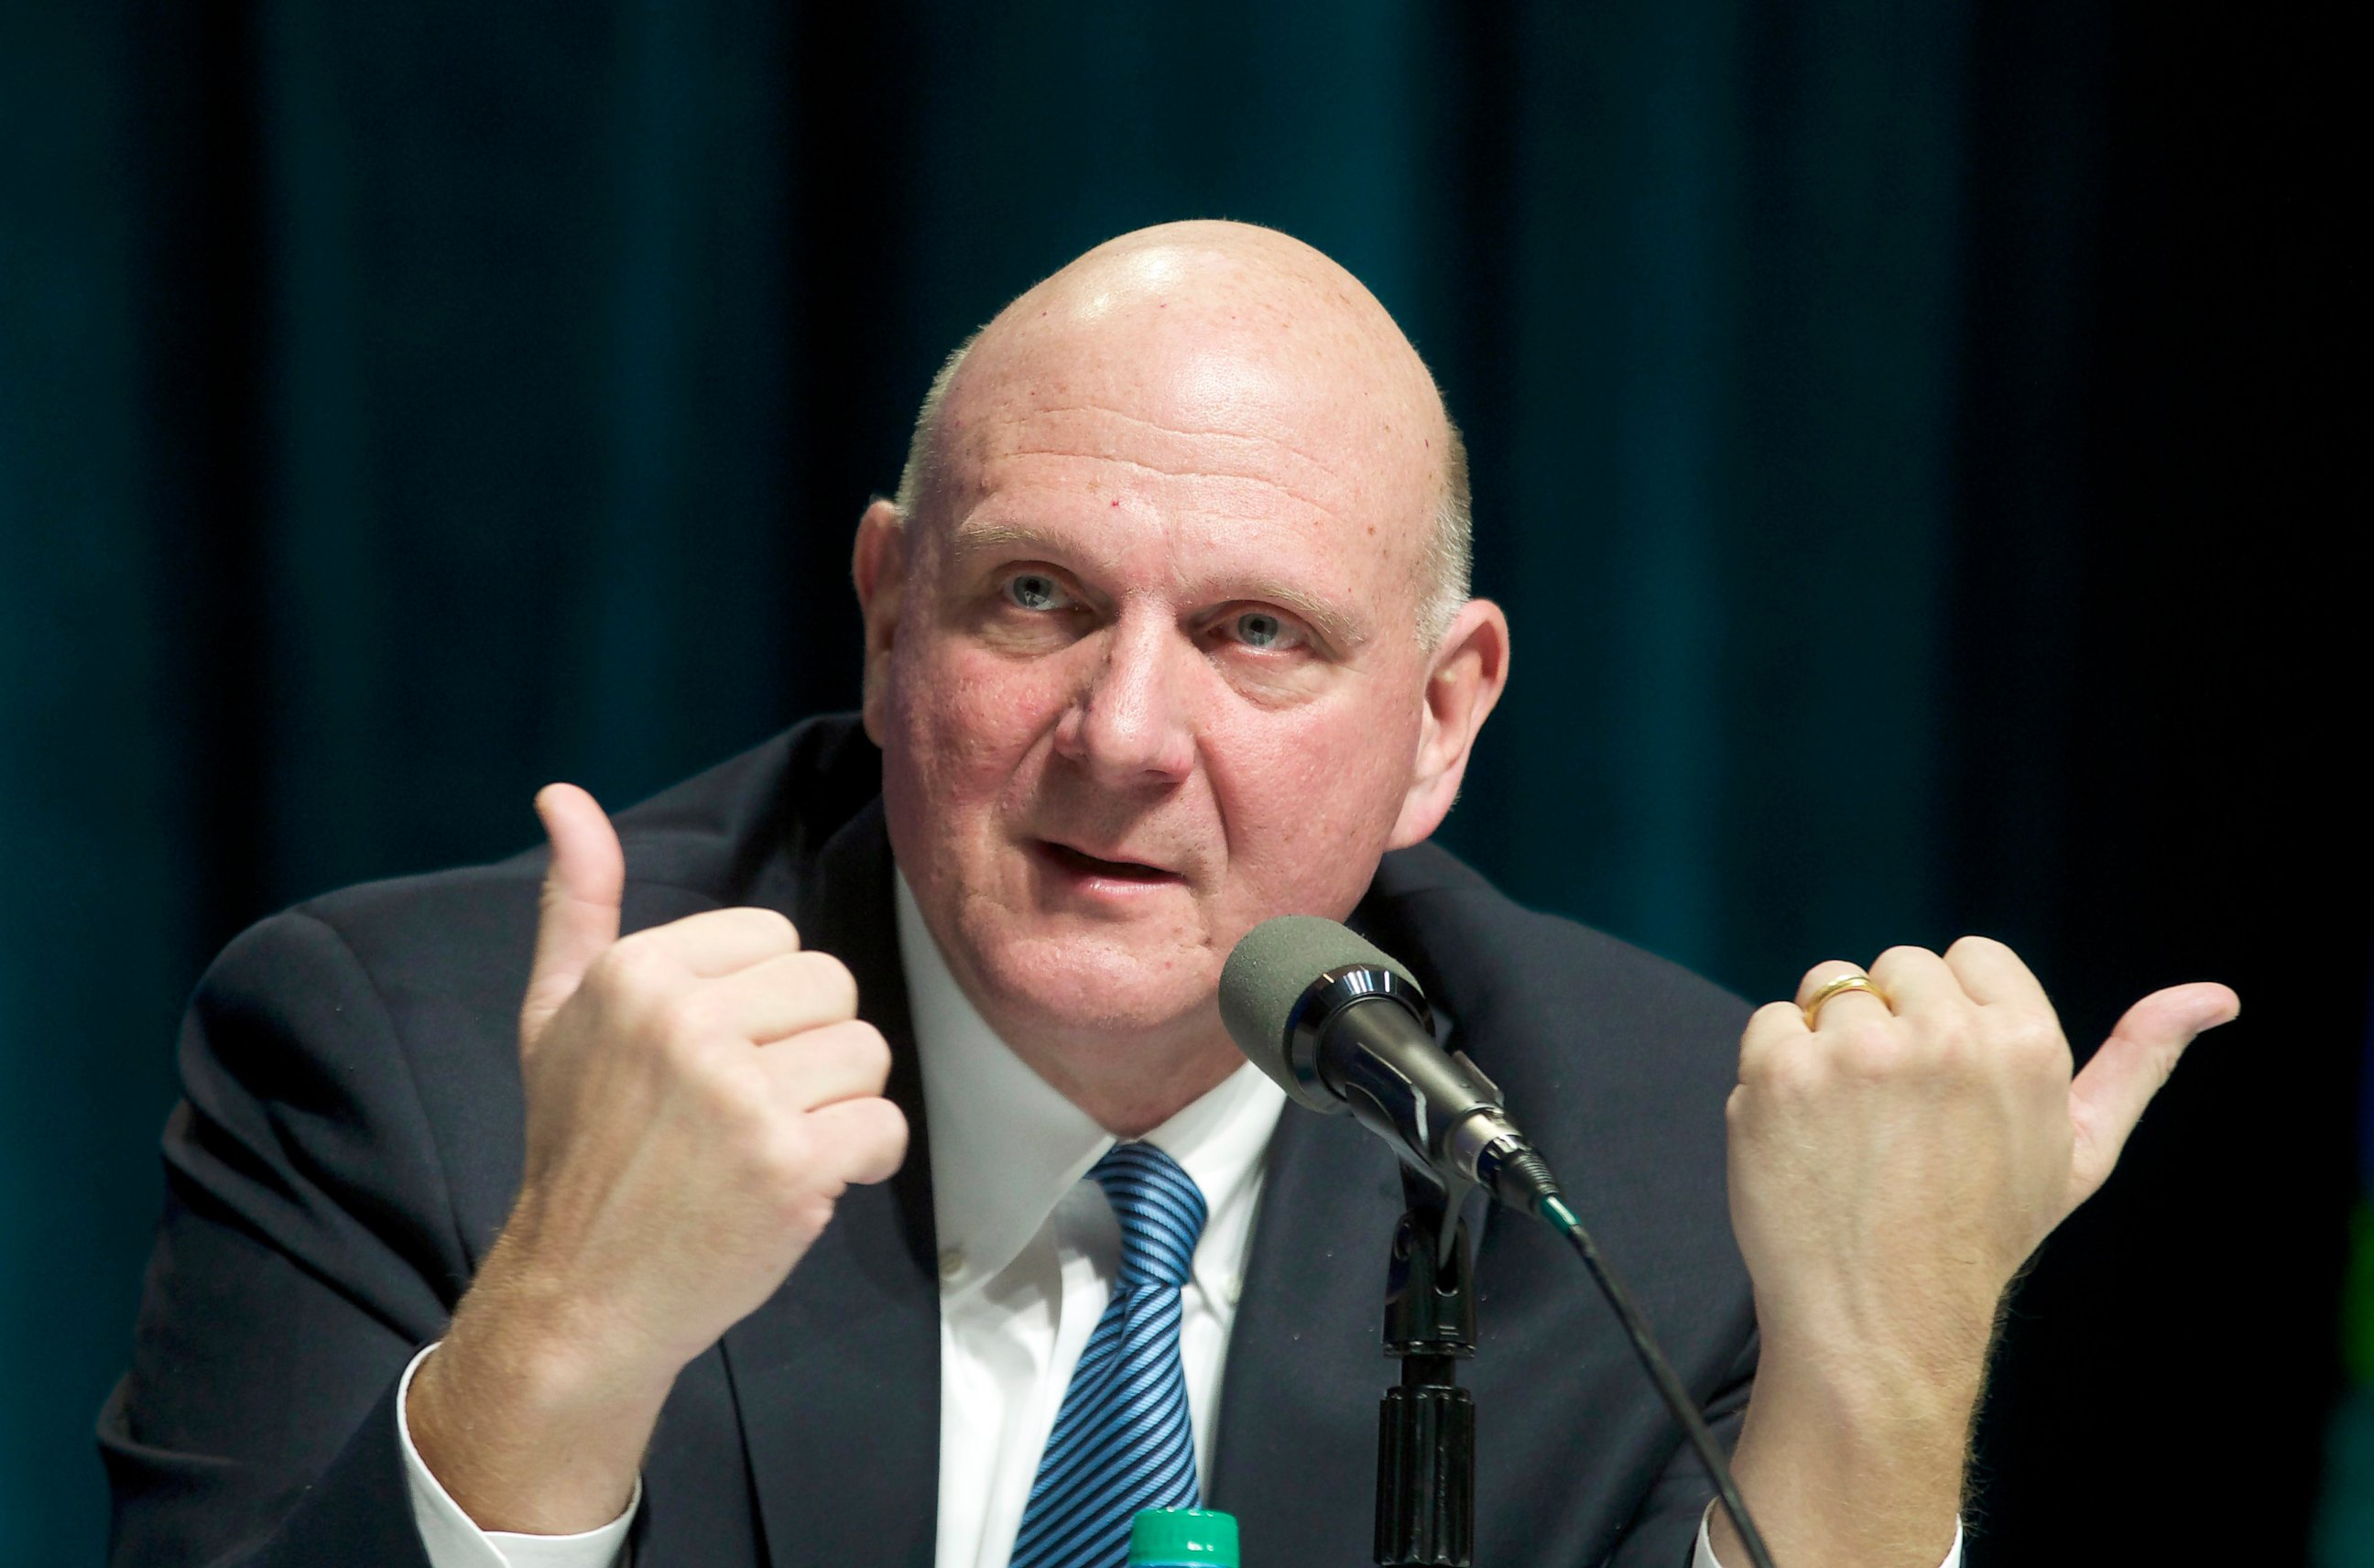 PHOTO: Former Microsoft CEO Steve Ballmer responds to a shareholder question during the Microsoft shareholders annual meeting, Nov. 19, 2013, in Bellevue, Washington.